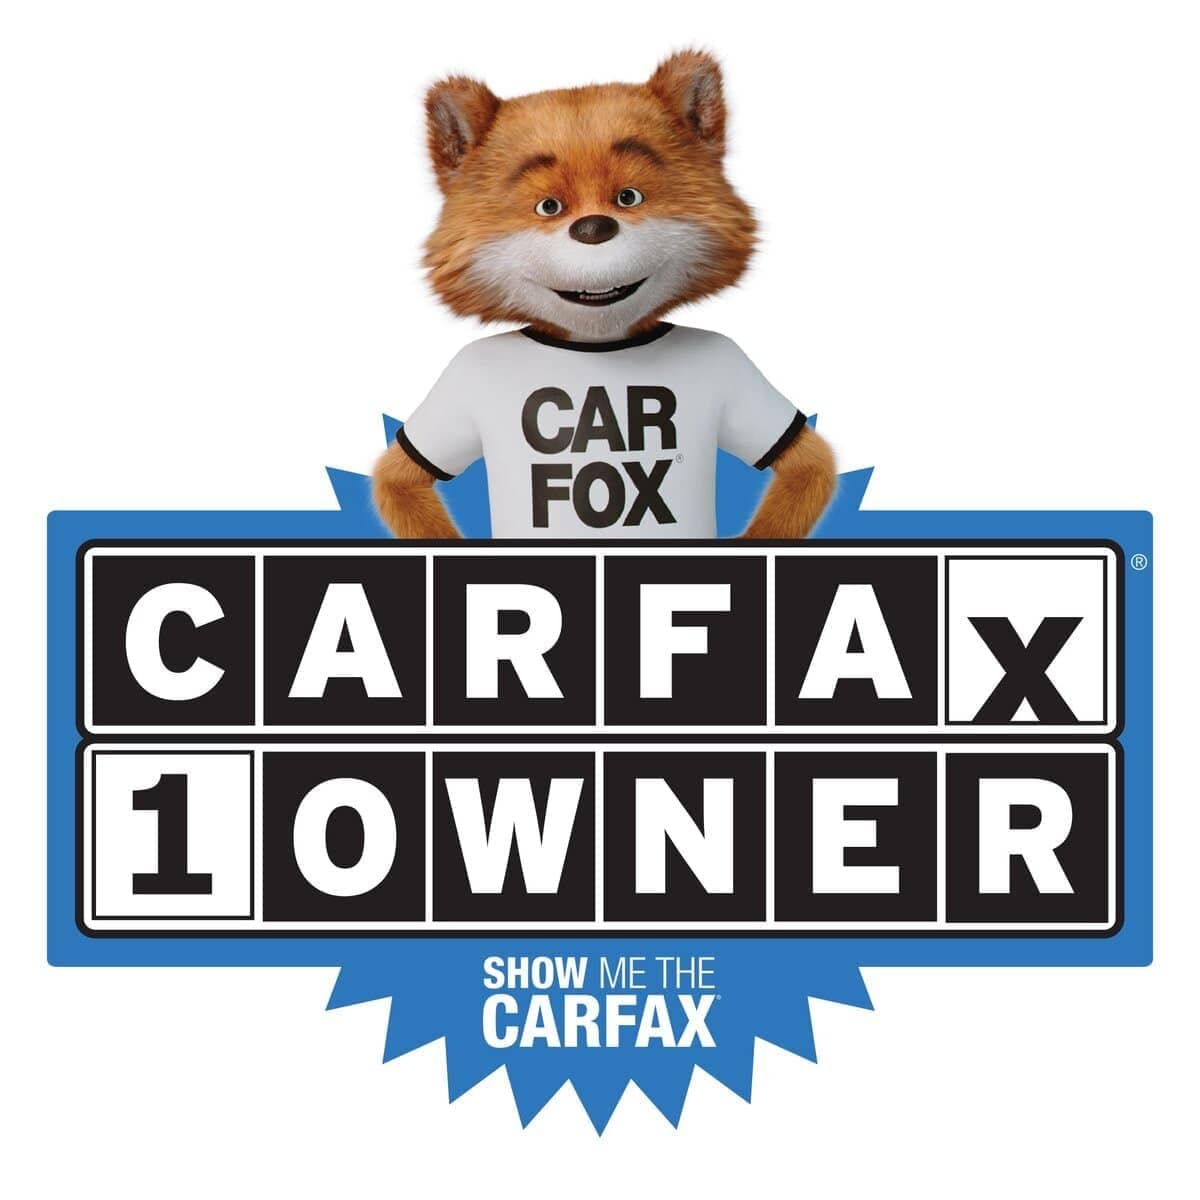 CARFAX 1 Owner